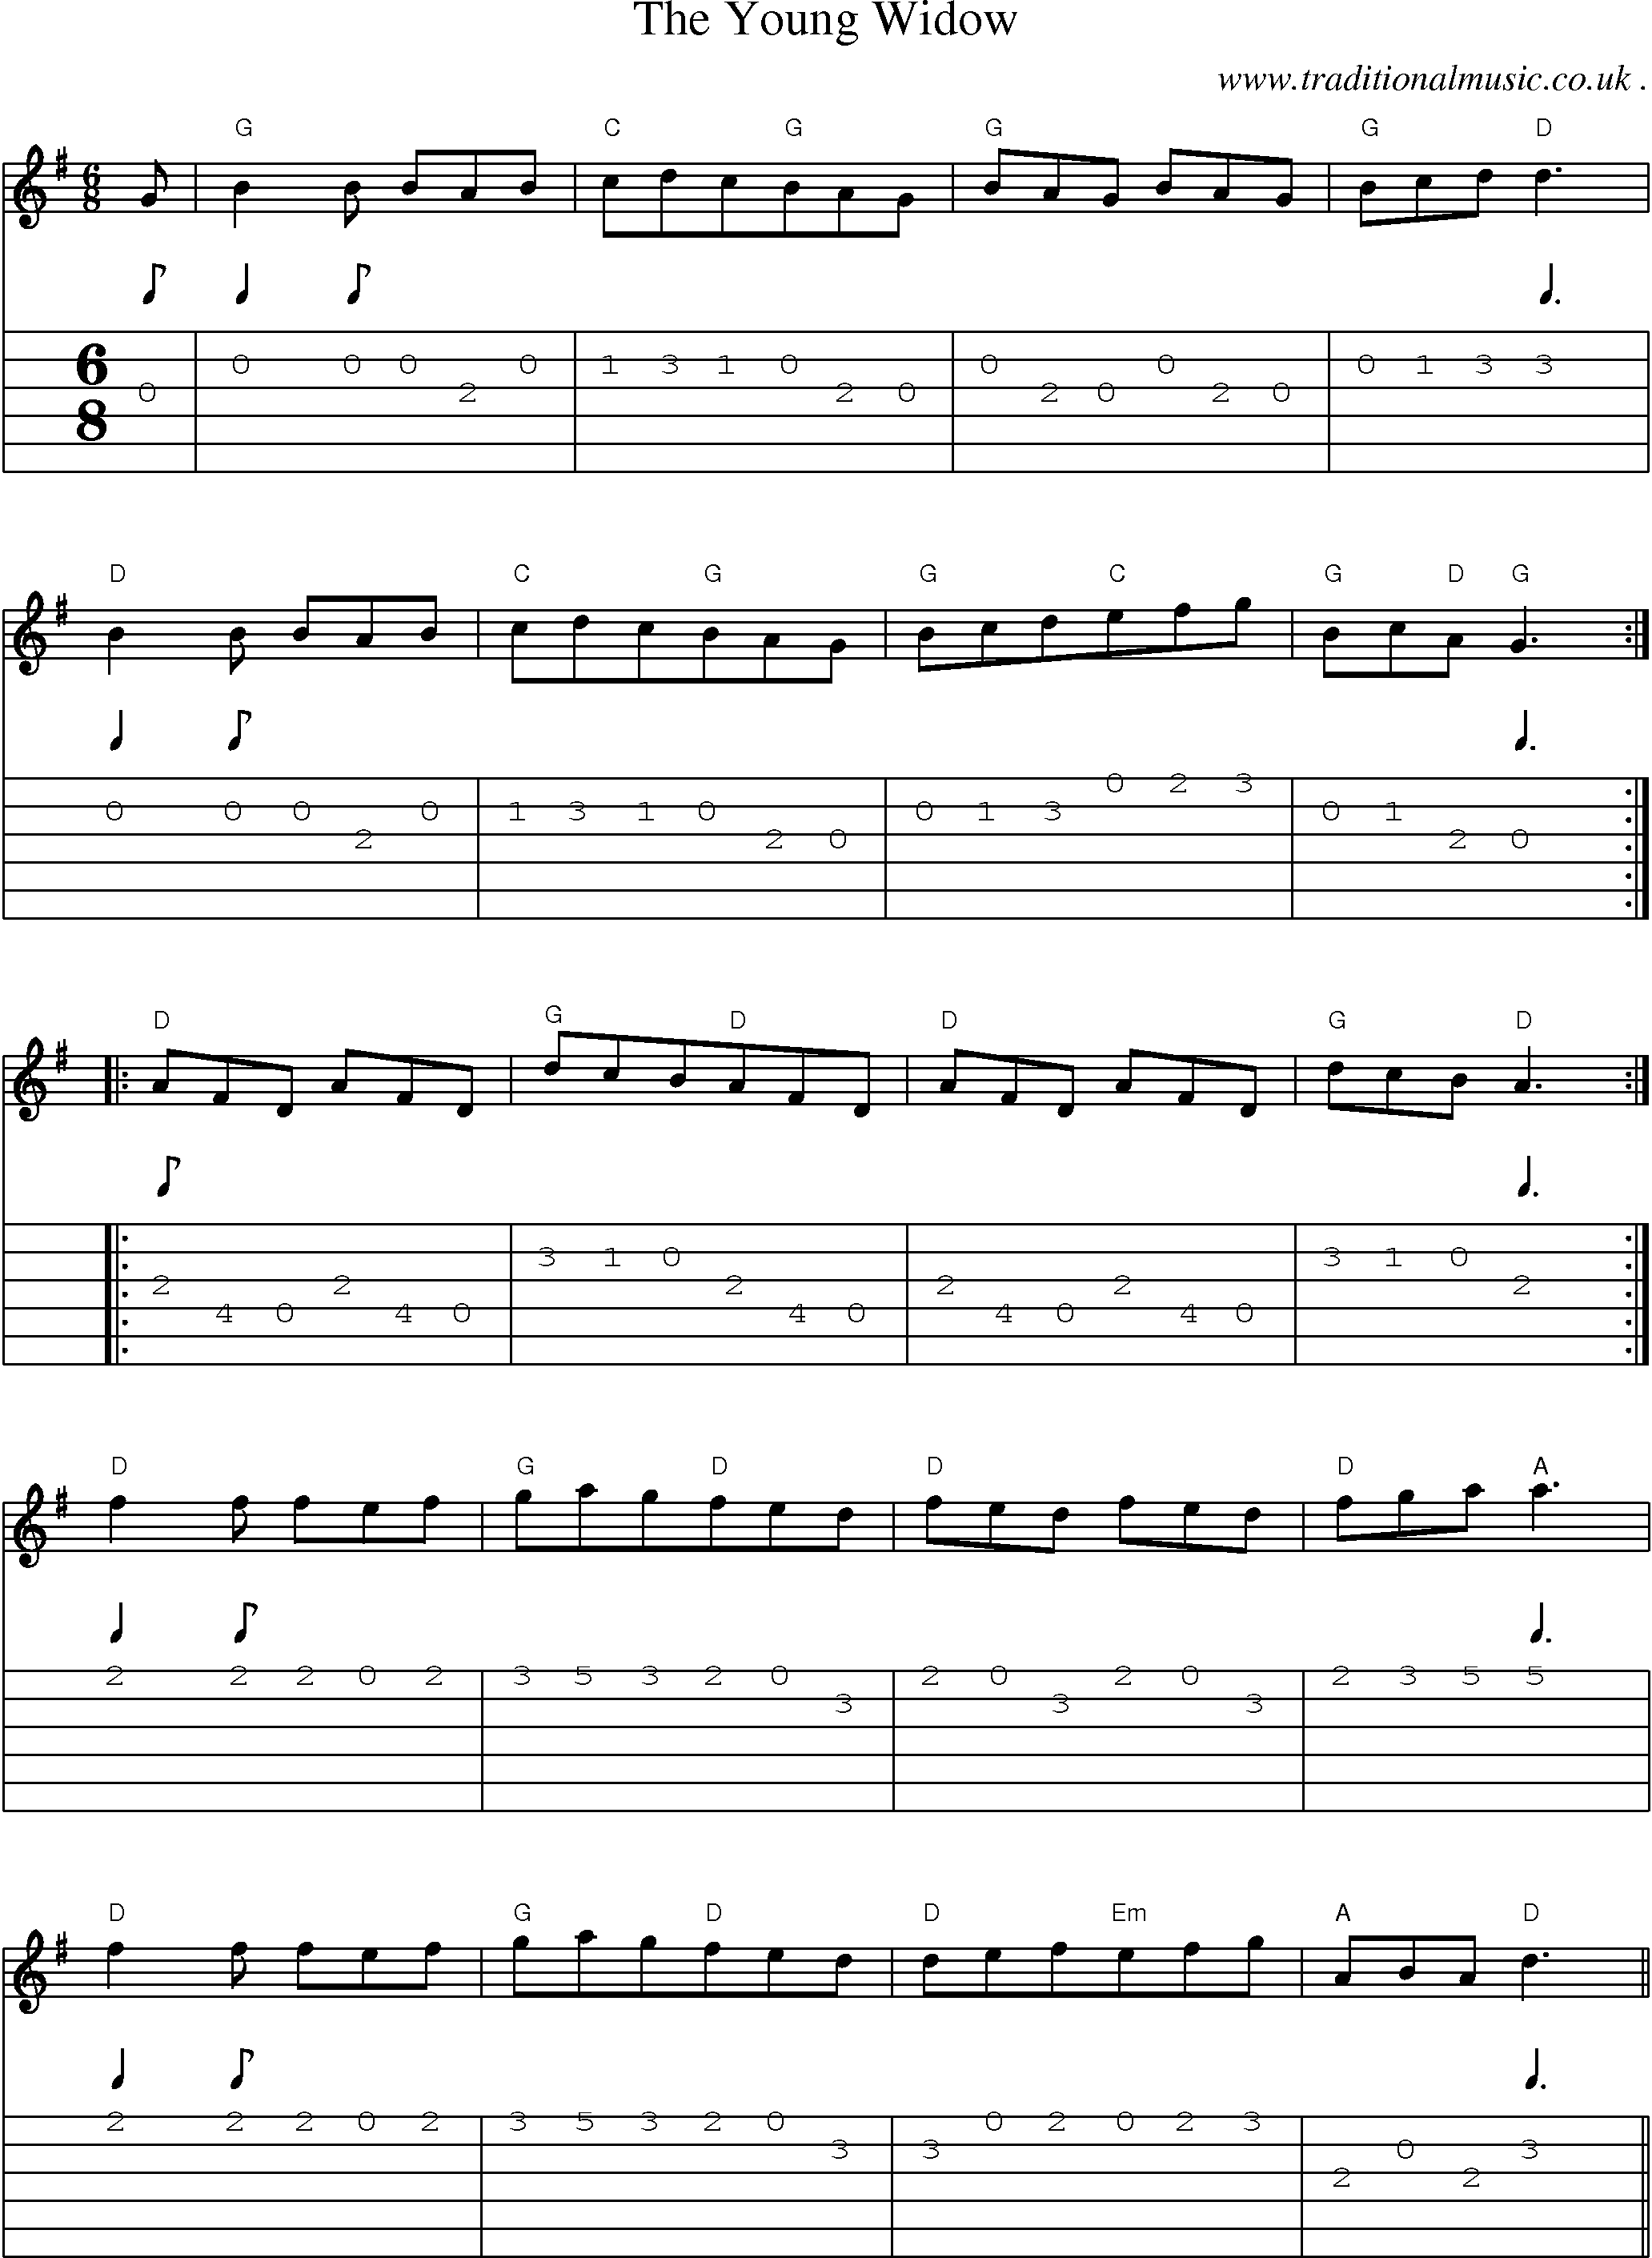 Sheet-Music and Guitar Tabs for The Young Widow